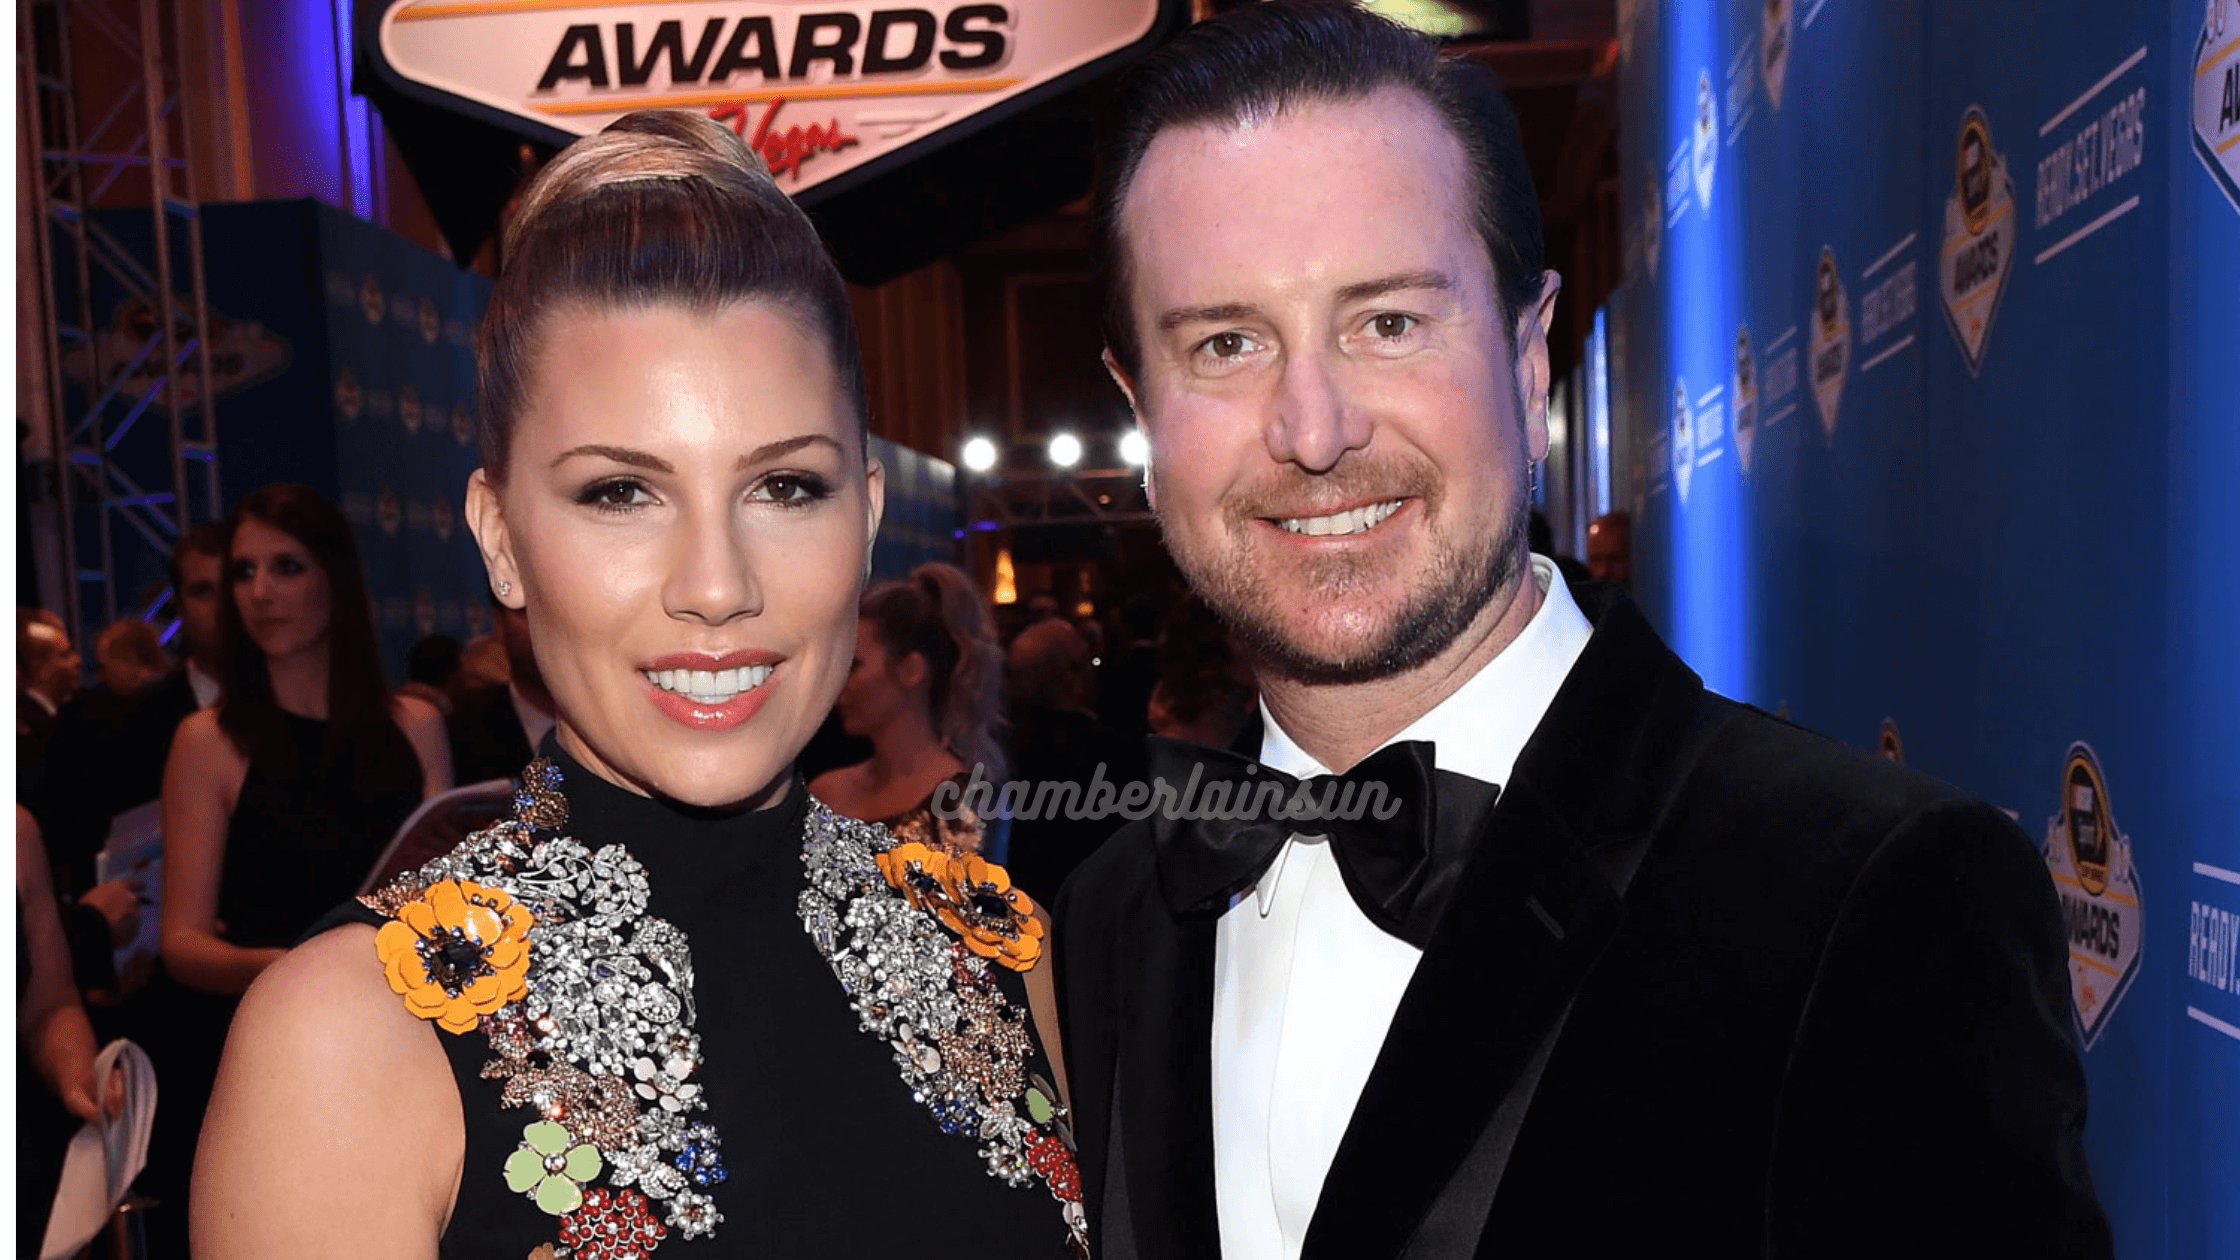 Kurt Busch And His Wife Ashley, Have Filed For Divorce! Kurt Busch Said Of His Split From Ashley!